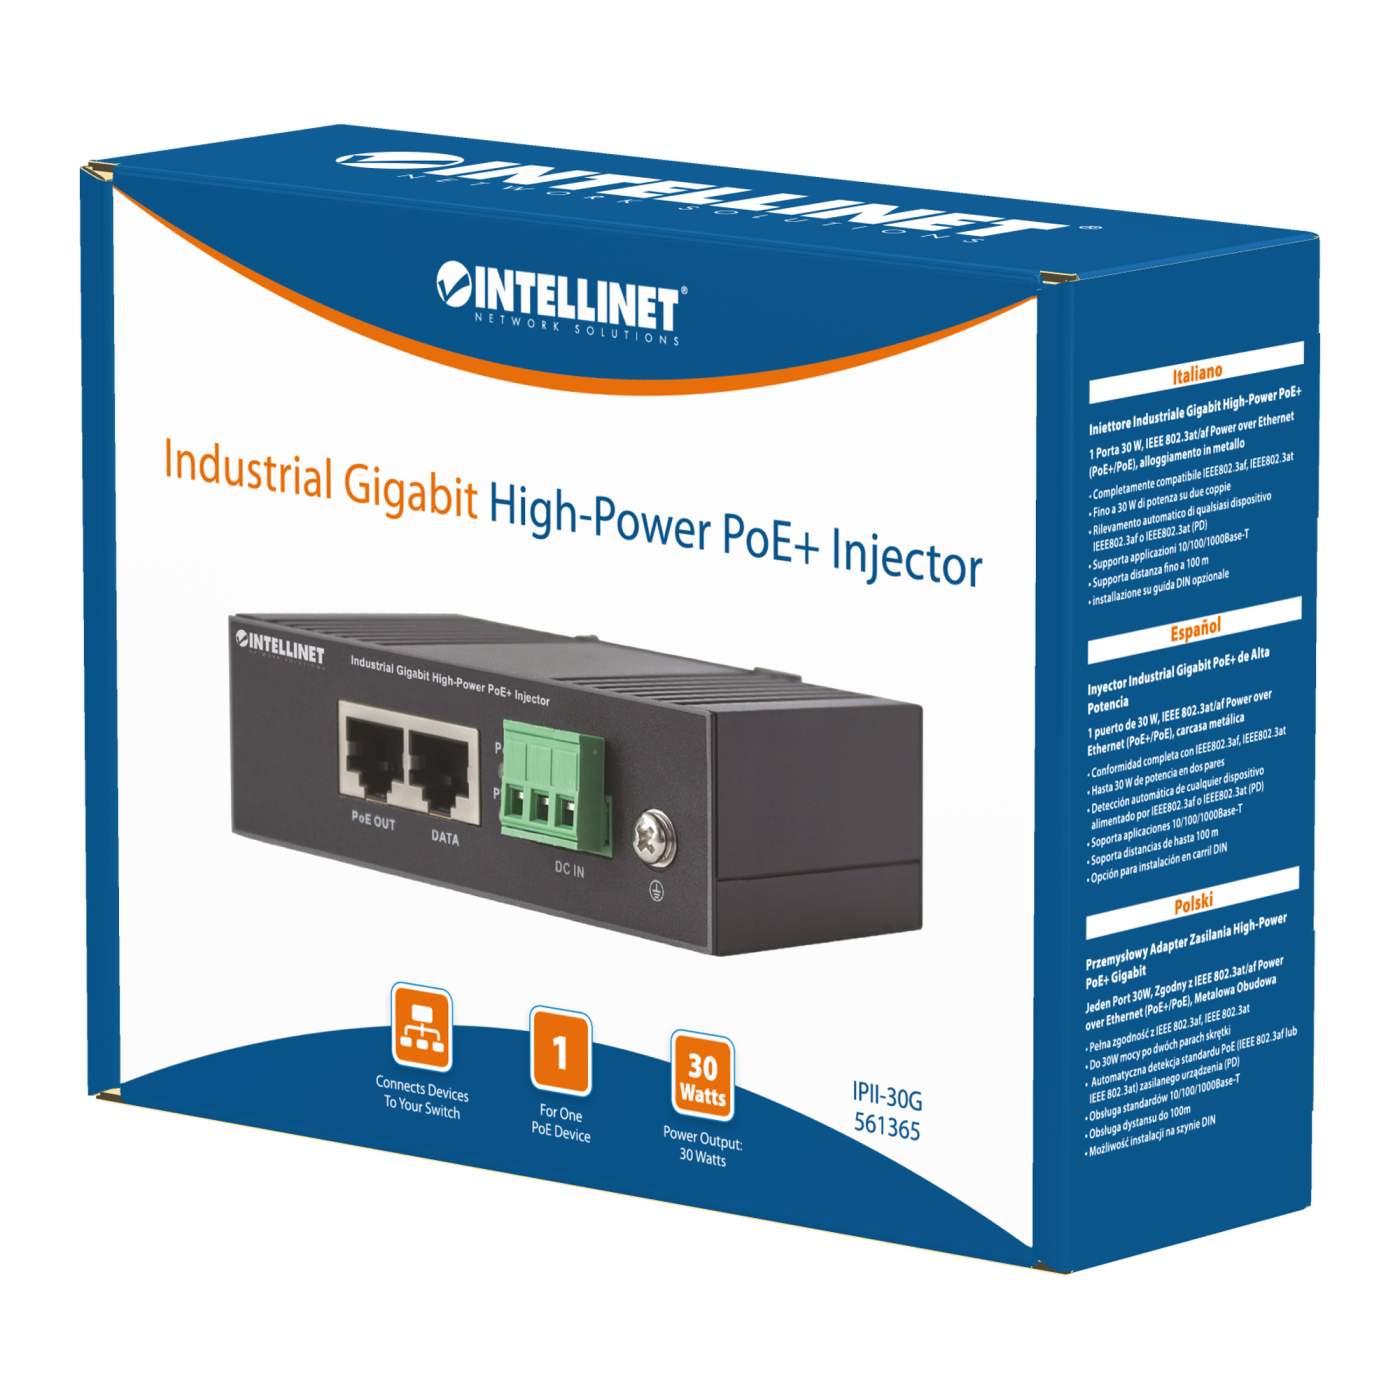 Industrial GbE High-Power PoE+ Injector (561365)